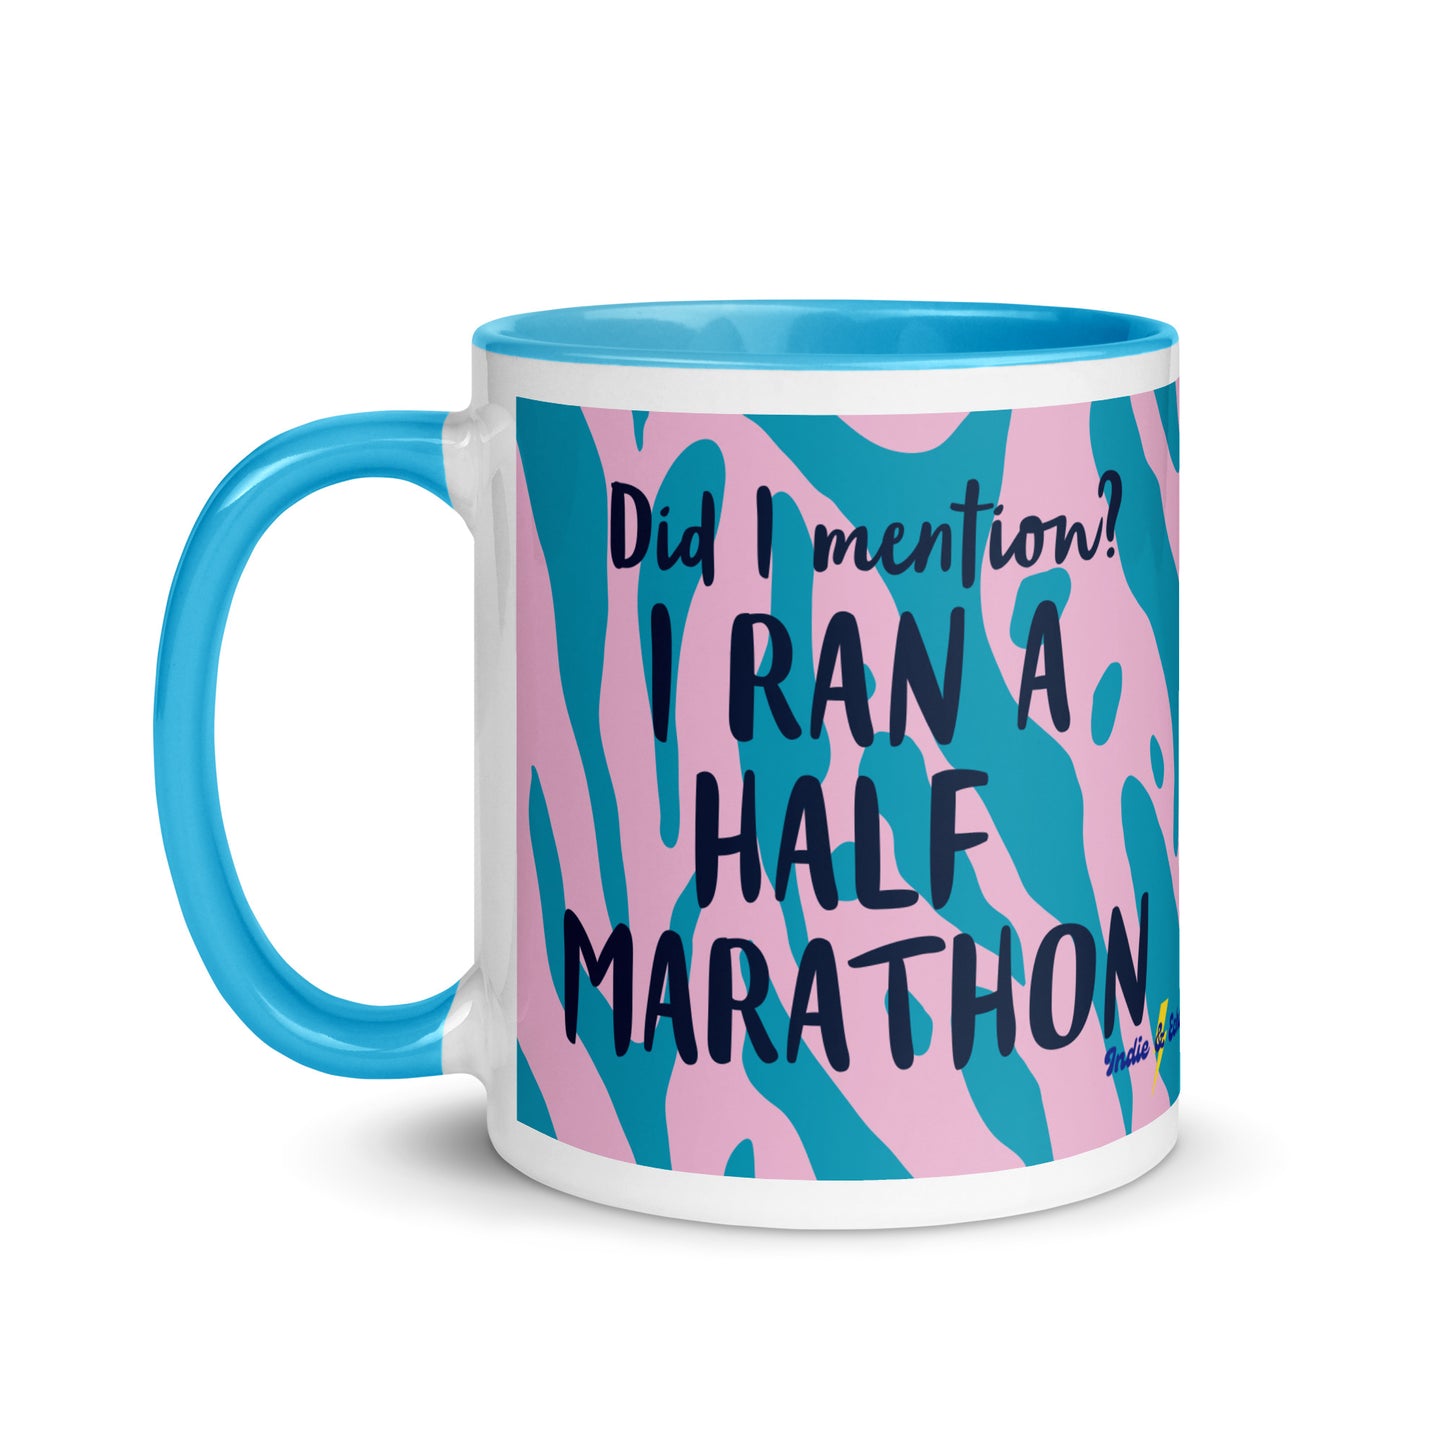 blue handled mug with pink and blue tiger print, and the phrase did i mention? I ran a marathon in a bold font